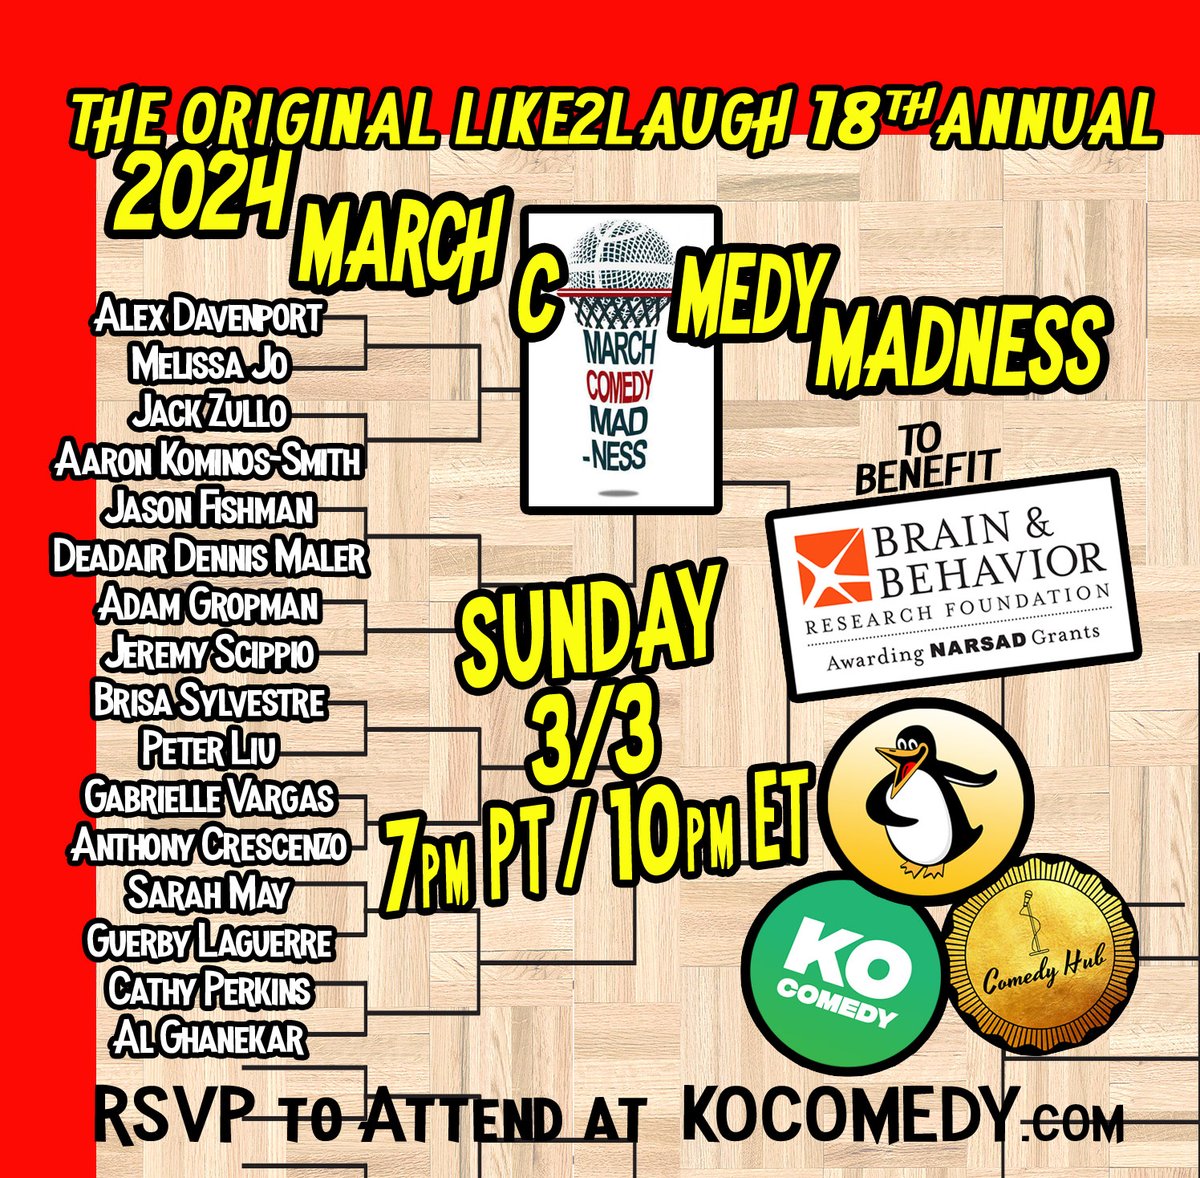 TONIGHT!!! The 18th Annual March Comedy Madness kicks off. Join @Like2Laugh4Real presenting a month worth of fundraising for @BBRFoundation. Get your free Zoom link at KOComedy.com, or watch on Twitch with @ComedyHubLive #KO #Comedy #LOL